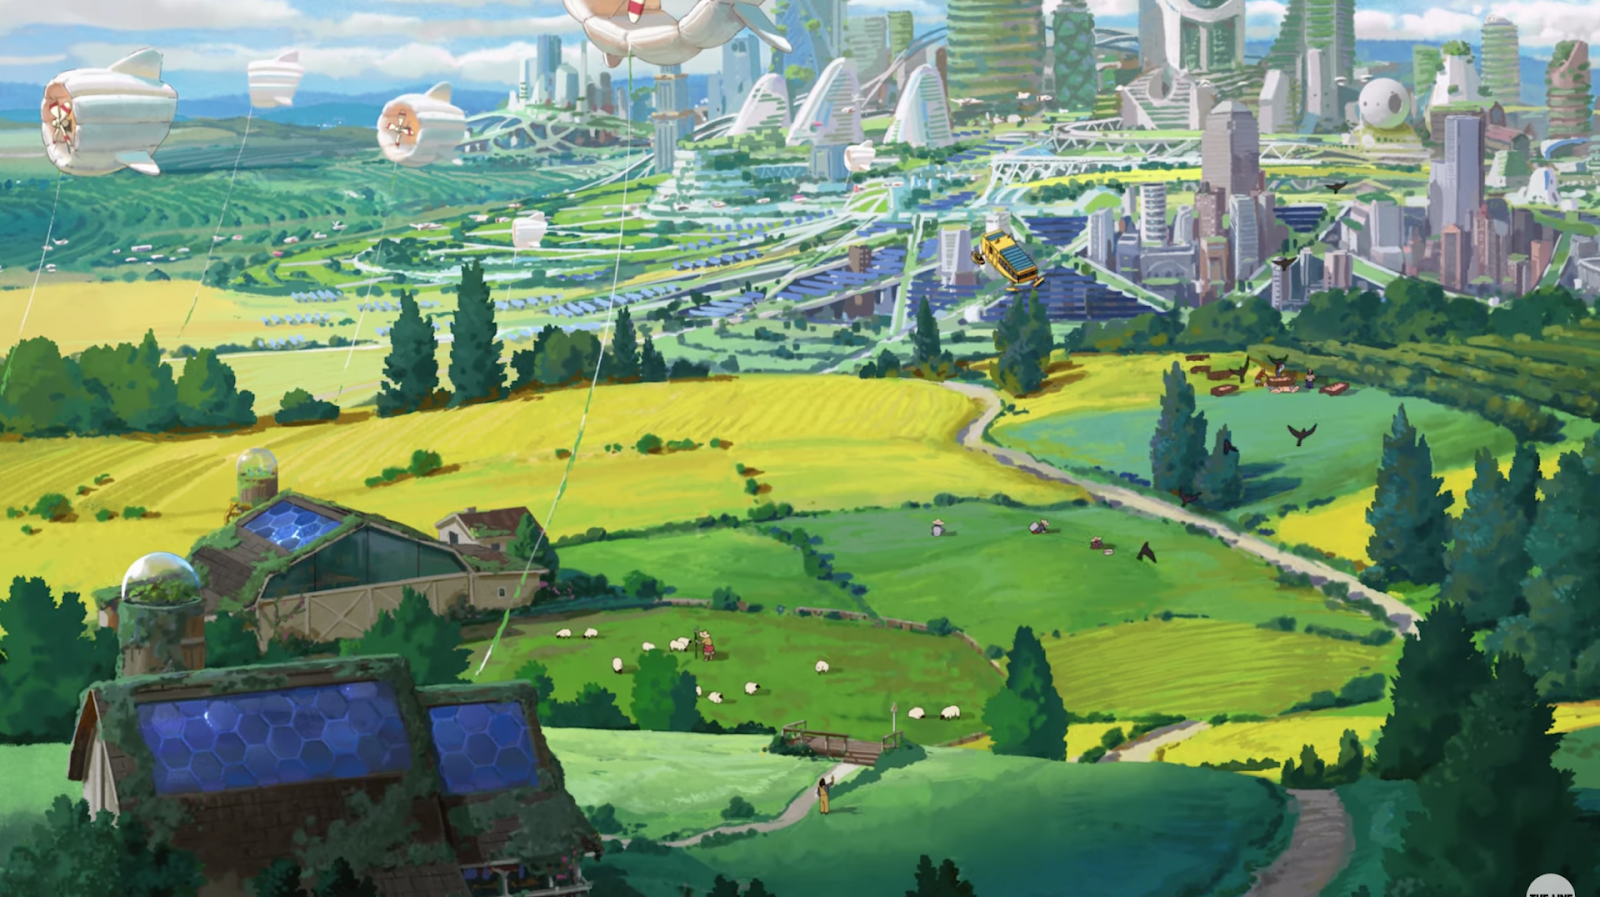 A still from the Chobani anime commercial Dear Alice by The Line; featuring a solarpunk future and a score from a Ghibli composer. Available at https://www.youtube.com/watch?v=z-Ng5ZvrDm4.  